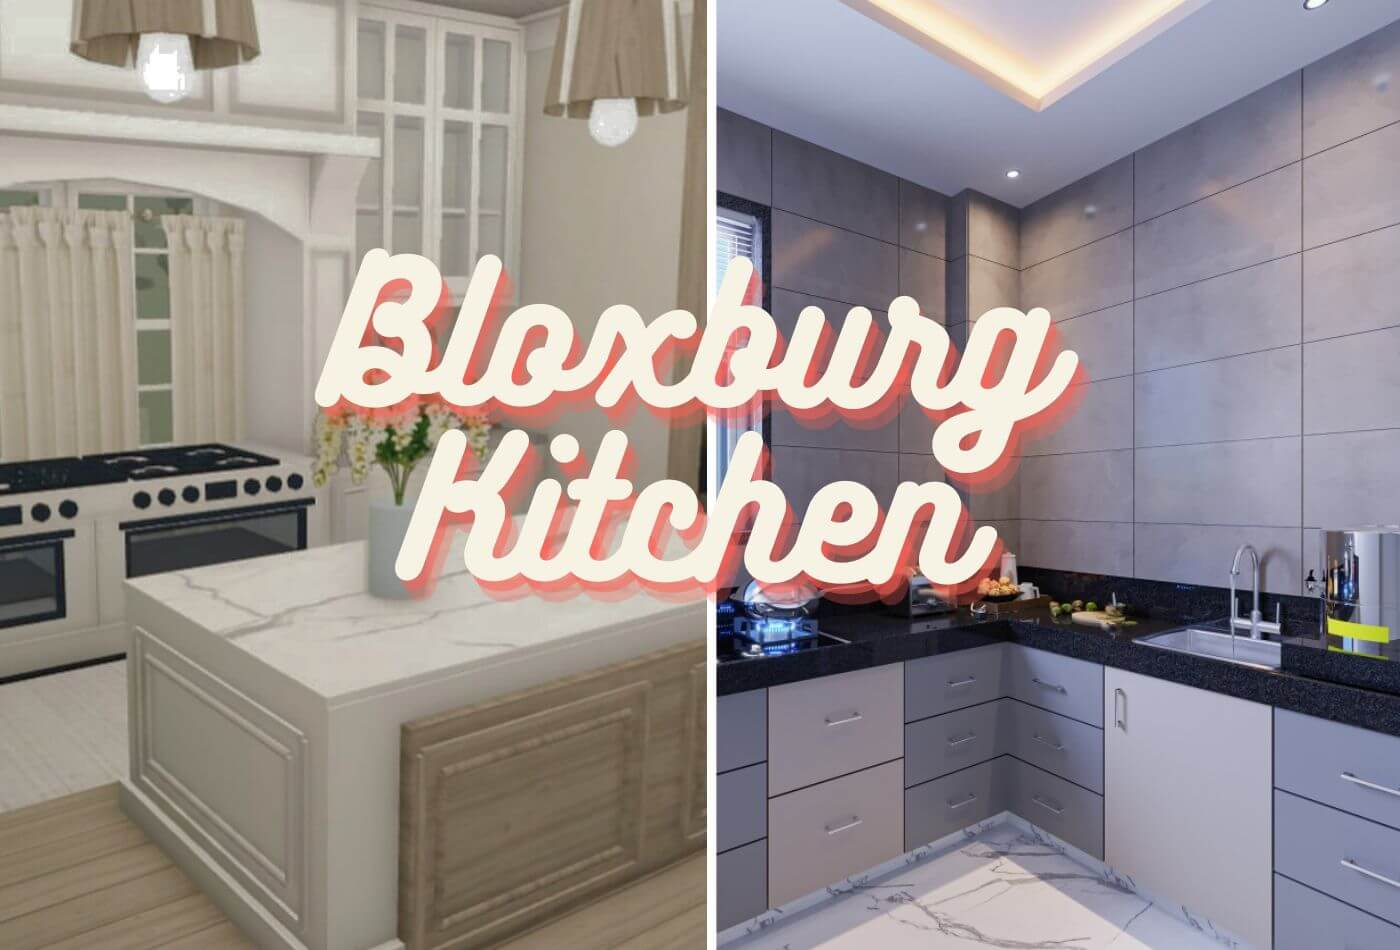 Bloxburg Kitchen: Game-Inspired for Virtual Culinary Haven